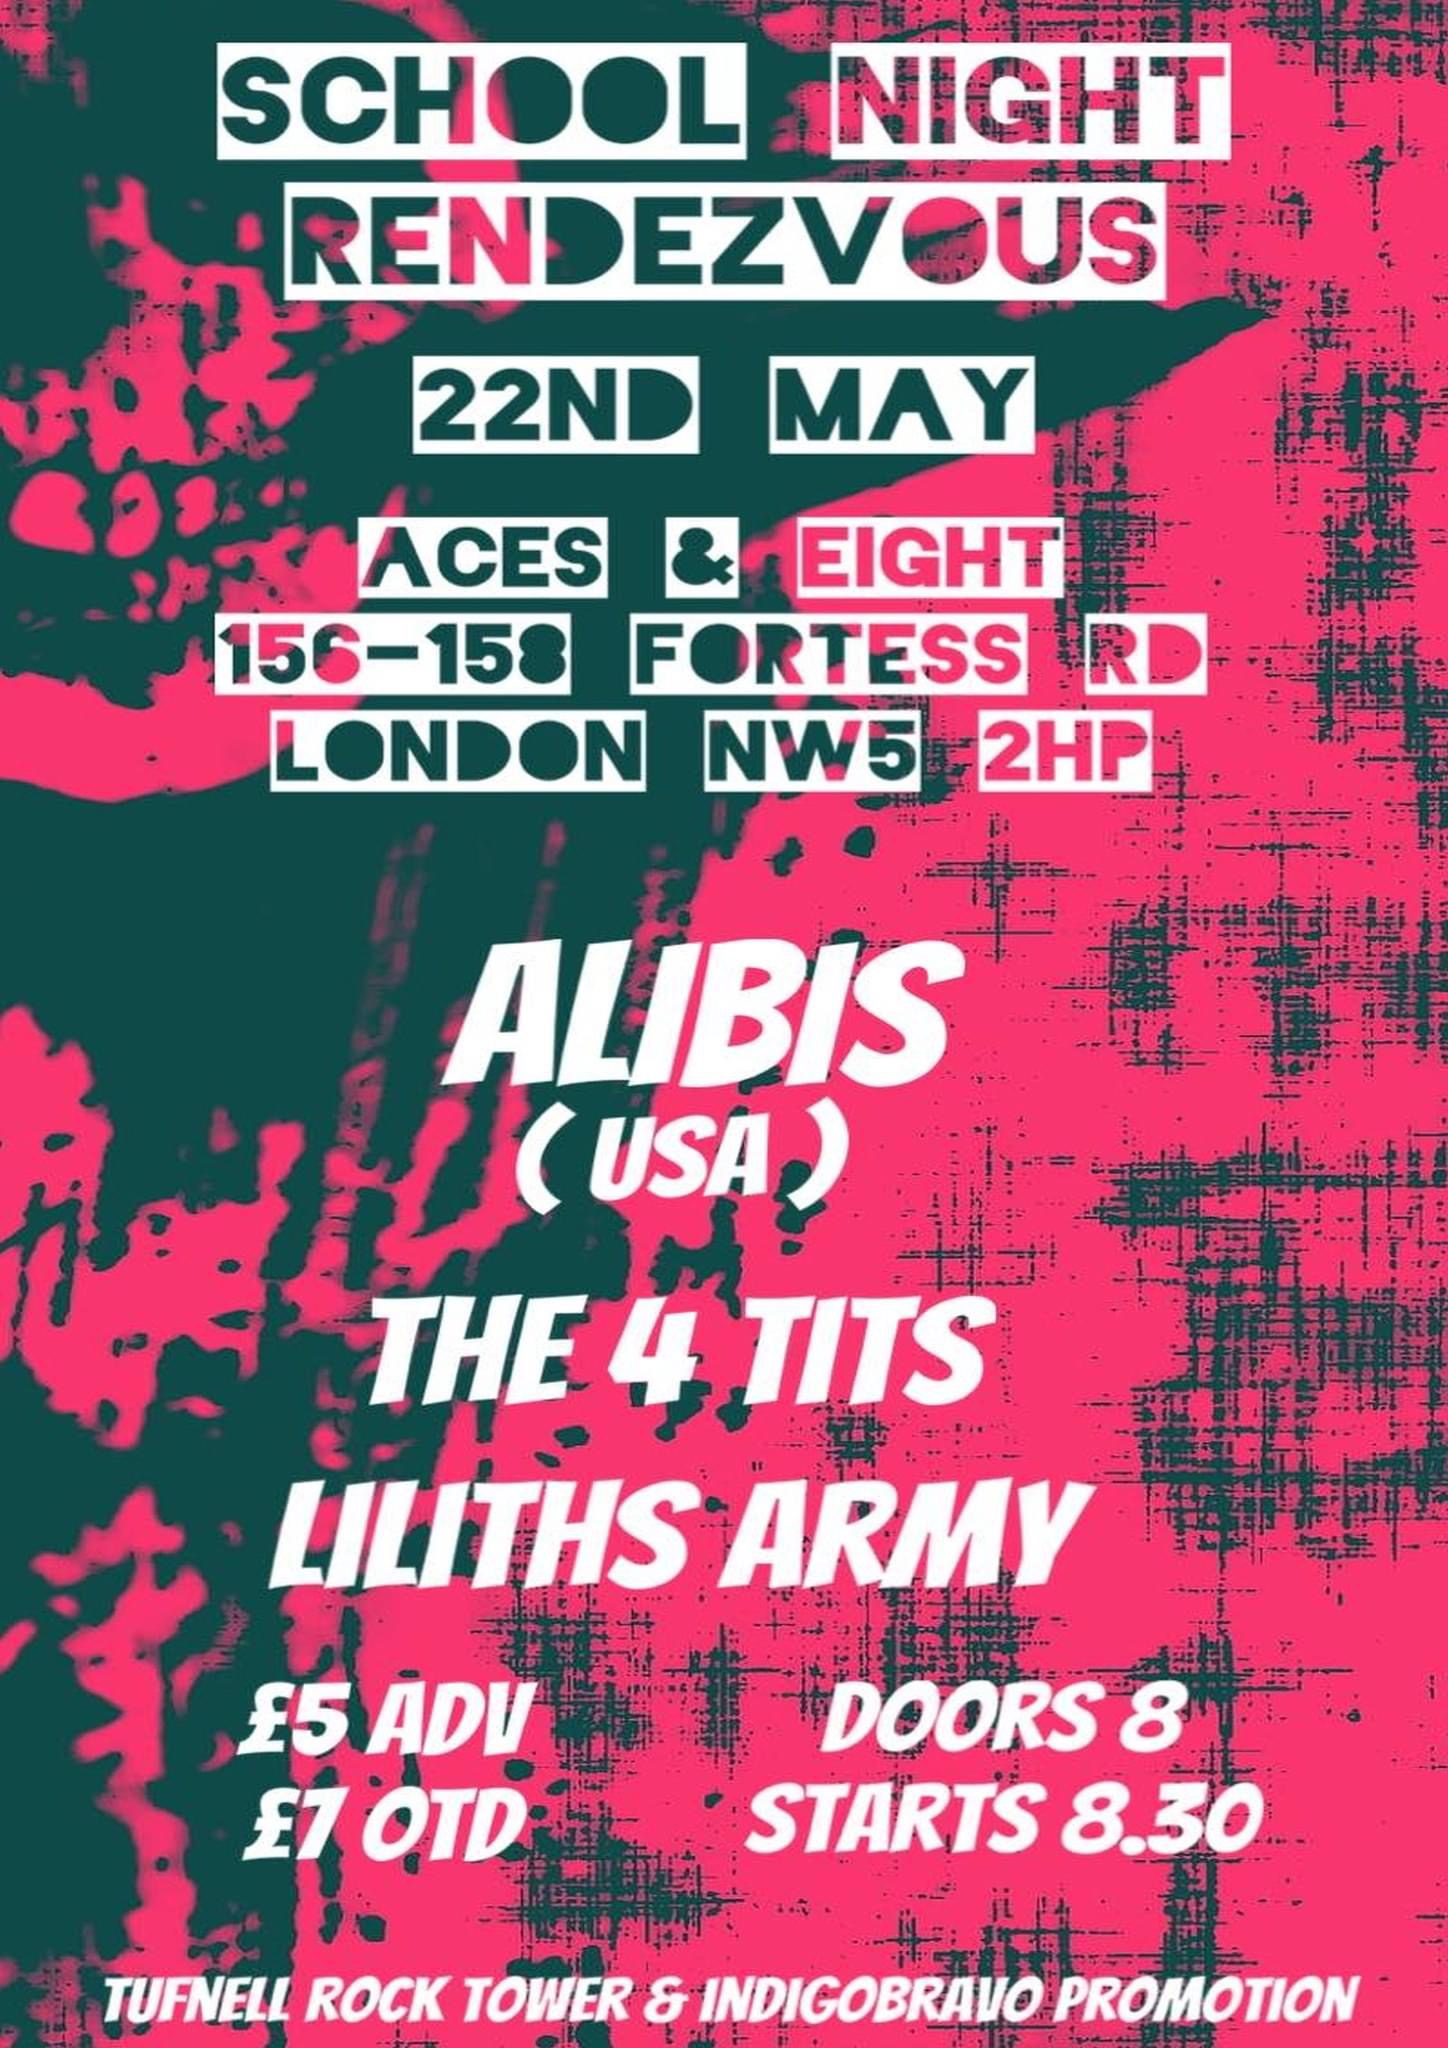 School Night Rendezvous with ALIBIS ( USA ) + The 4 Tits + Liliths Arms